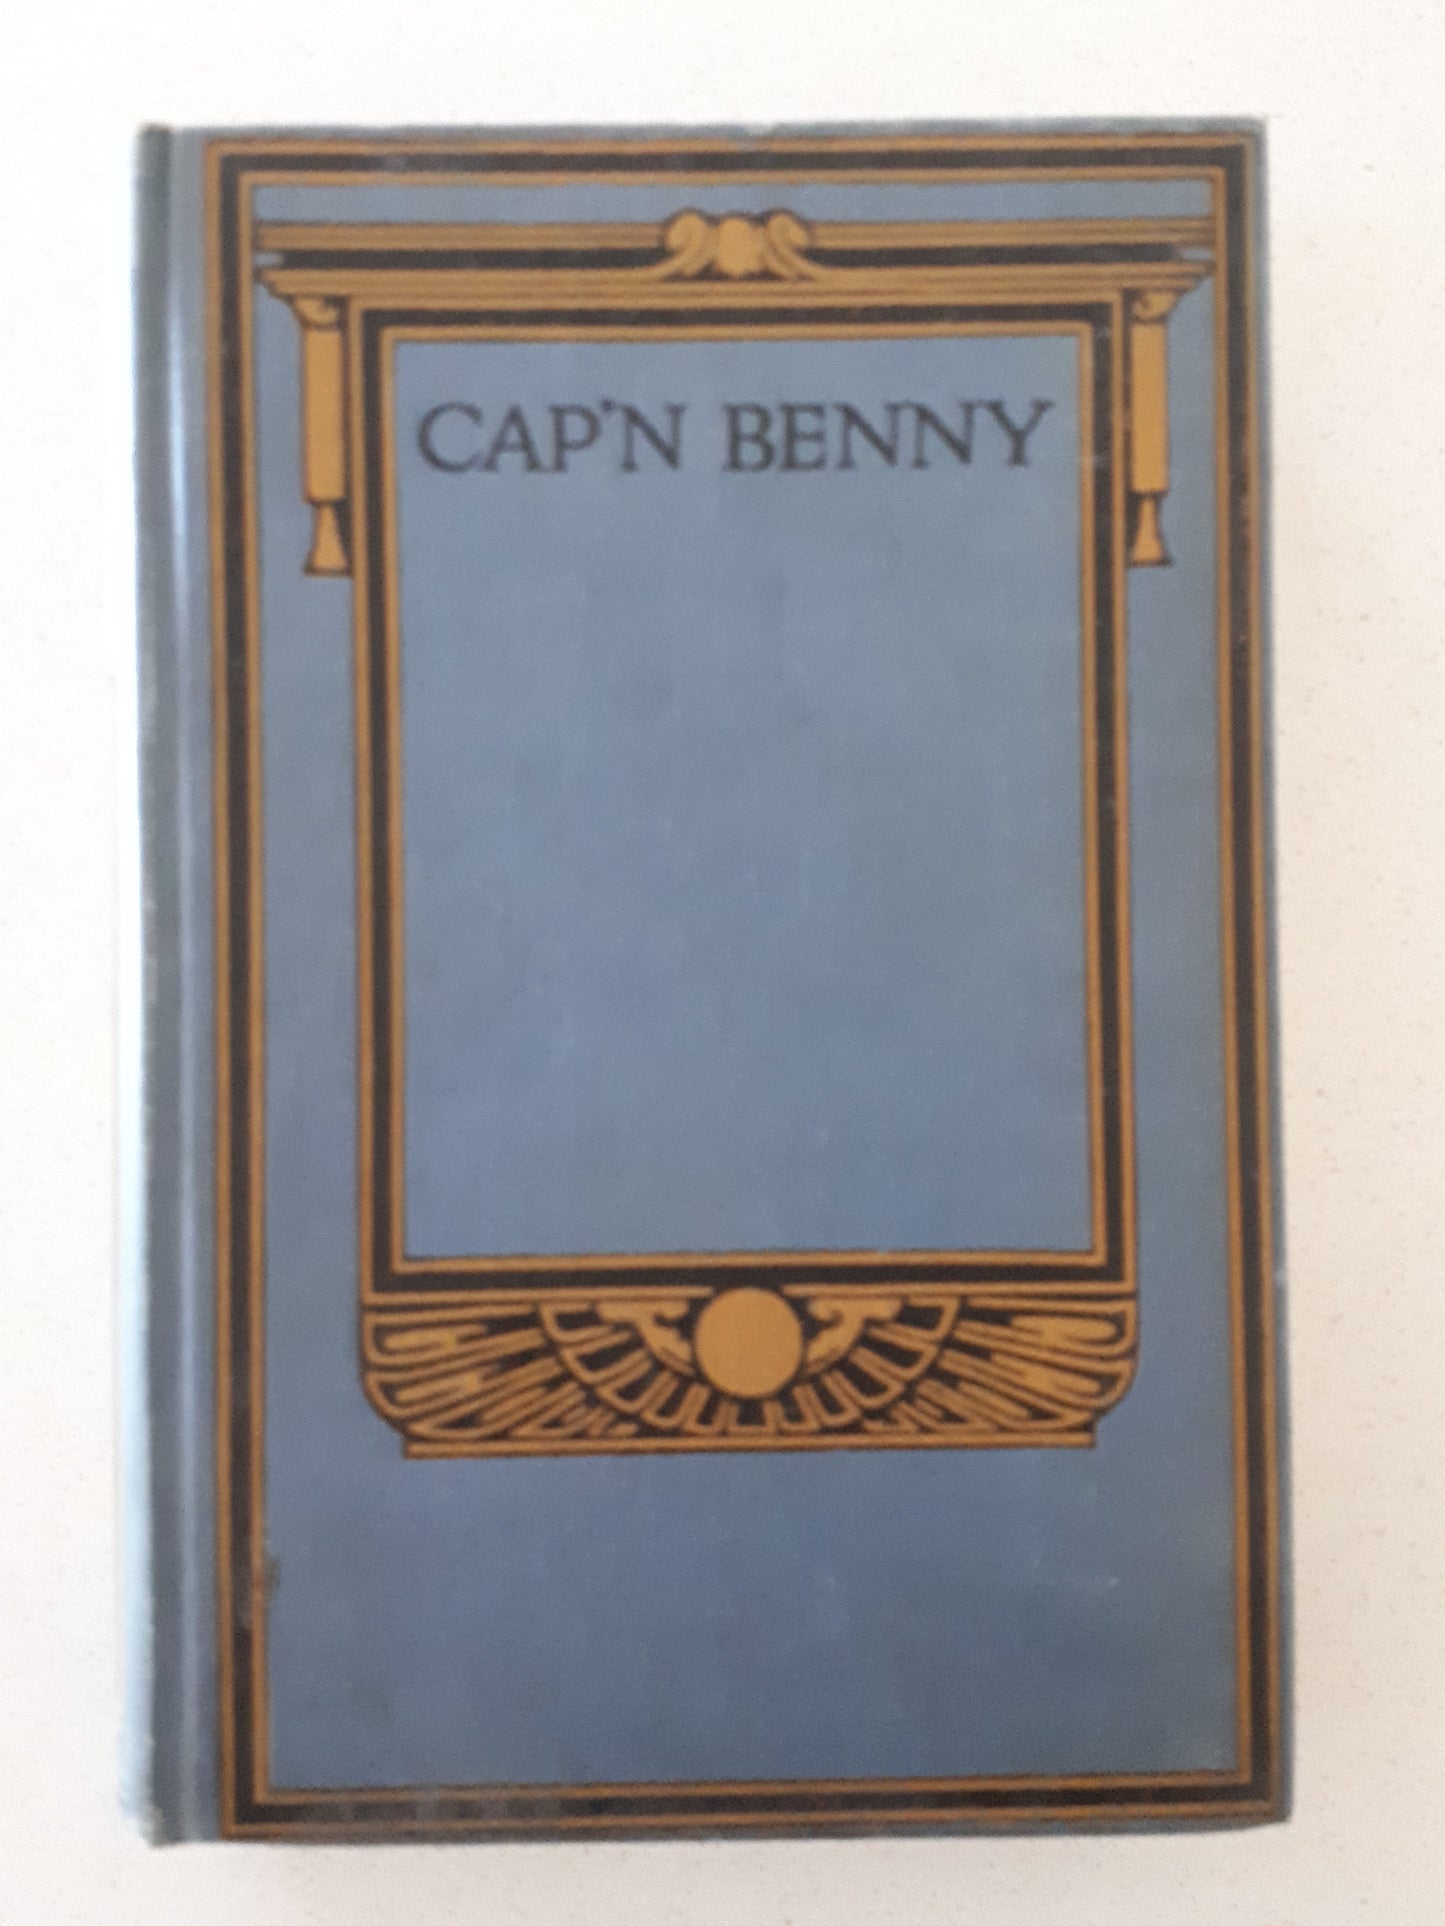 Cap'n Benny by H. Lawrence Phillips